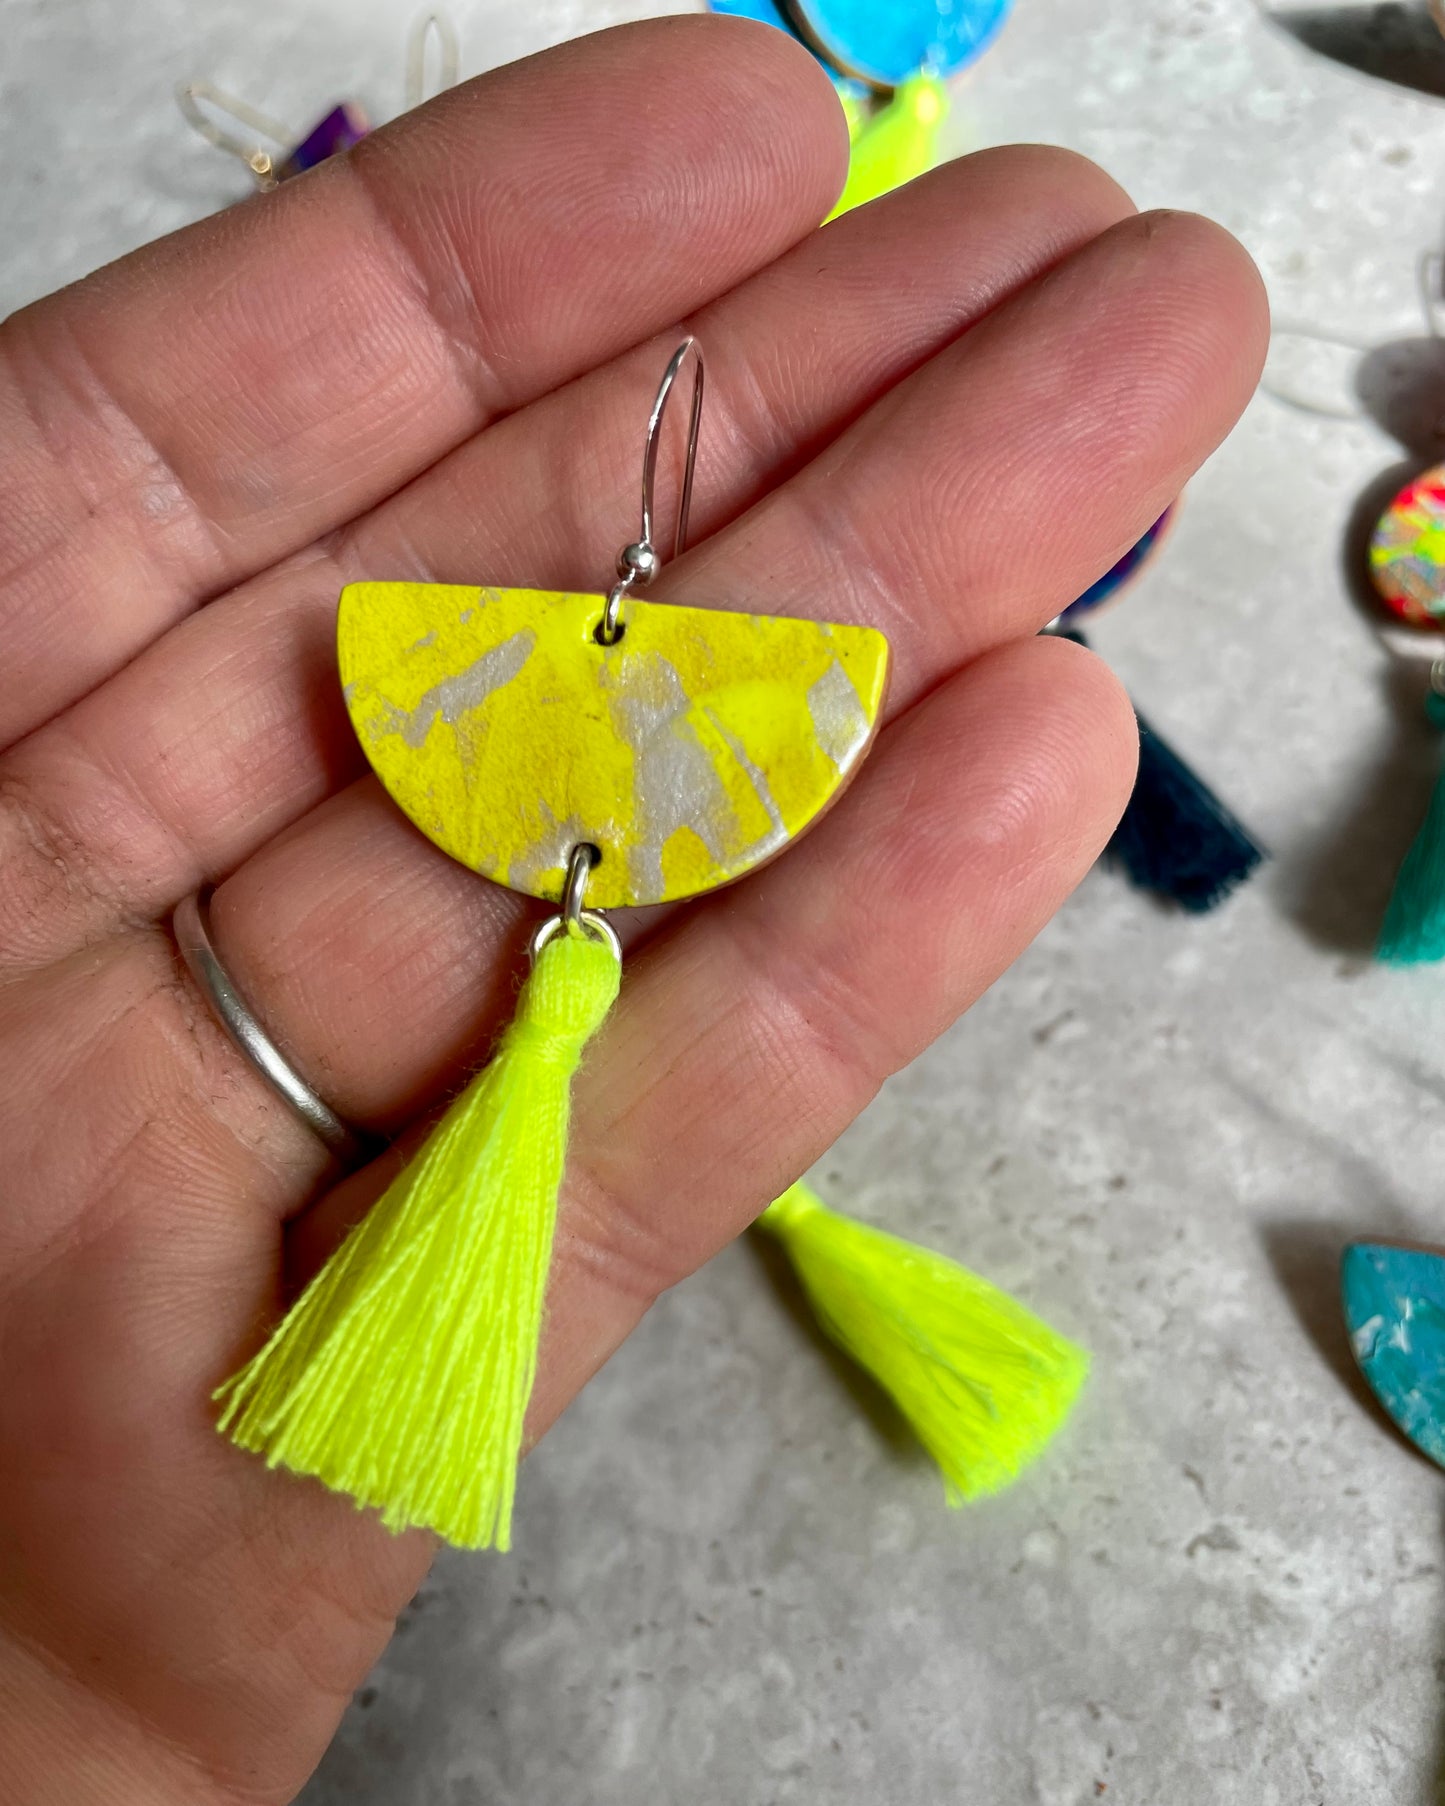 Neon Yellow and Silver Half Moon Hand Painted Leather Earrings with Tassel